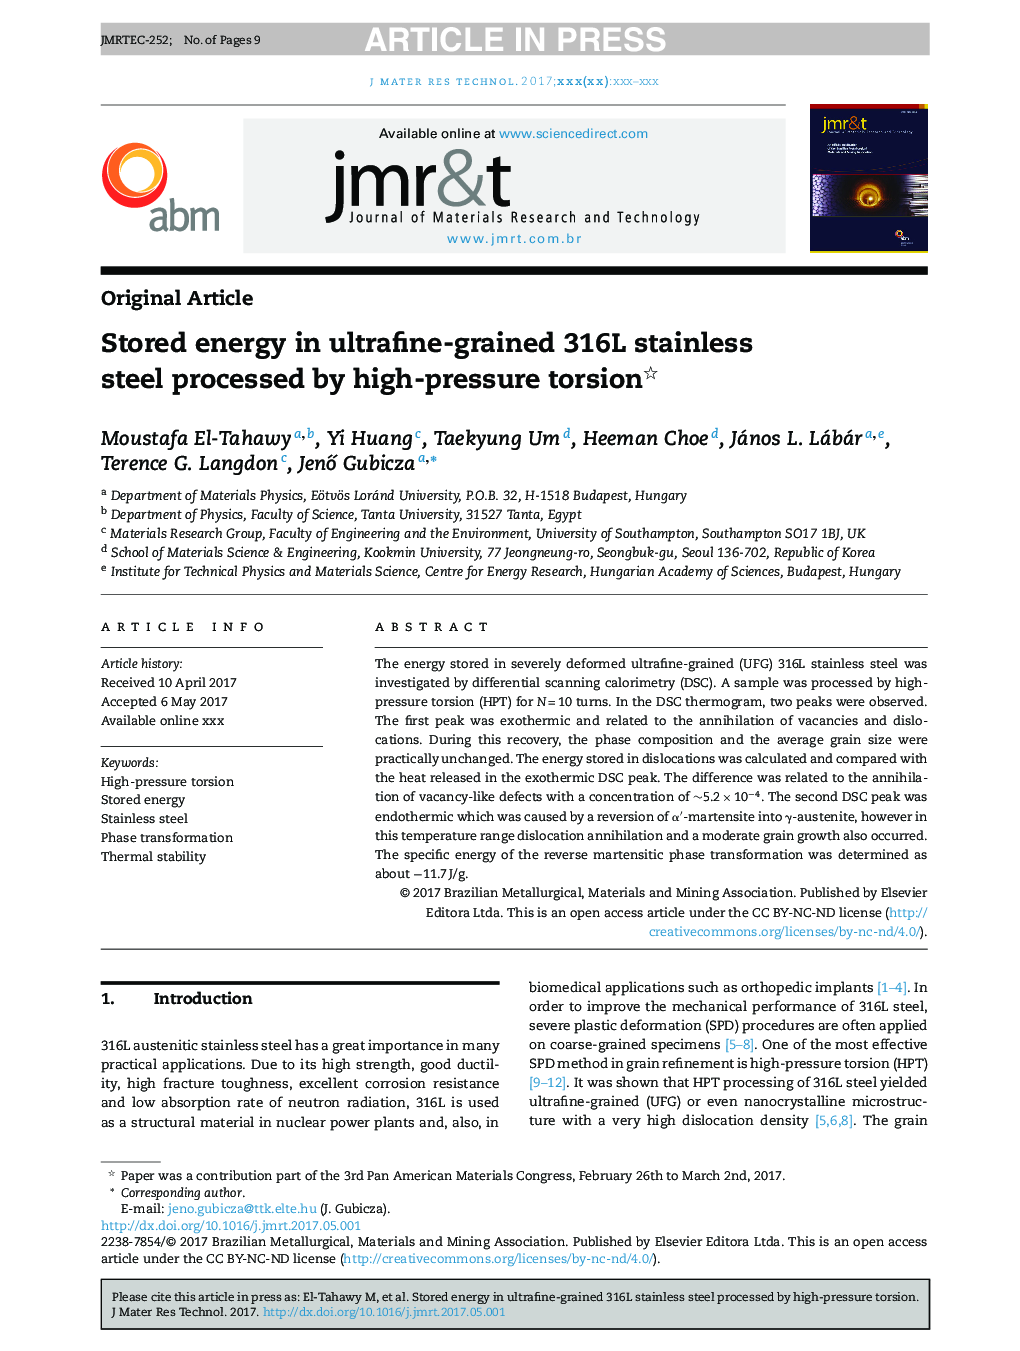 Stored energy in ultrafine-grained 316L stainless steel processed by high-pressure torsion